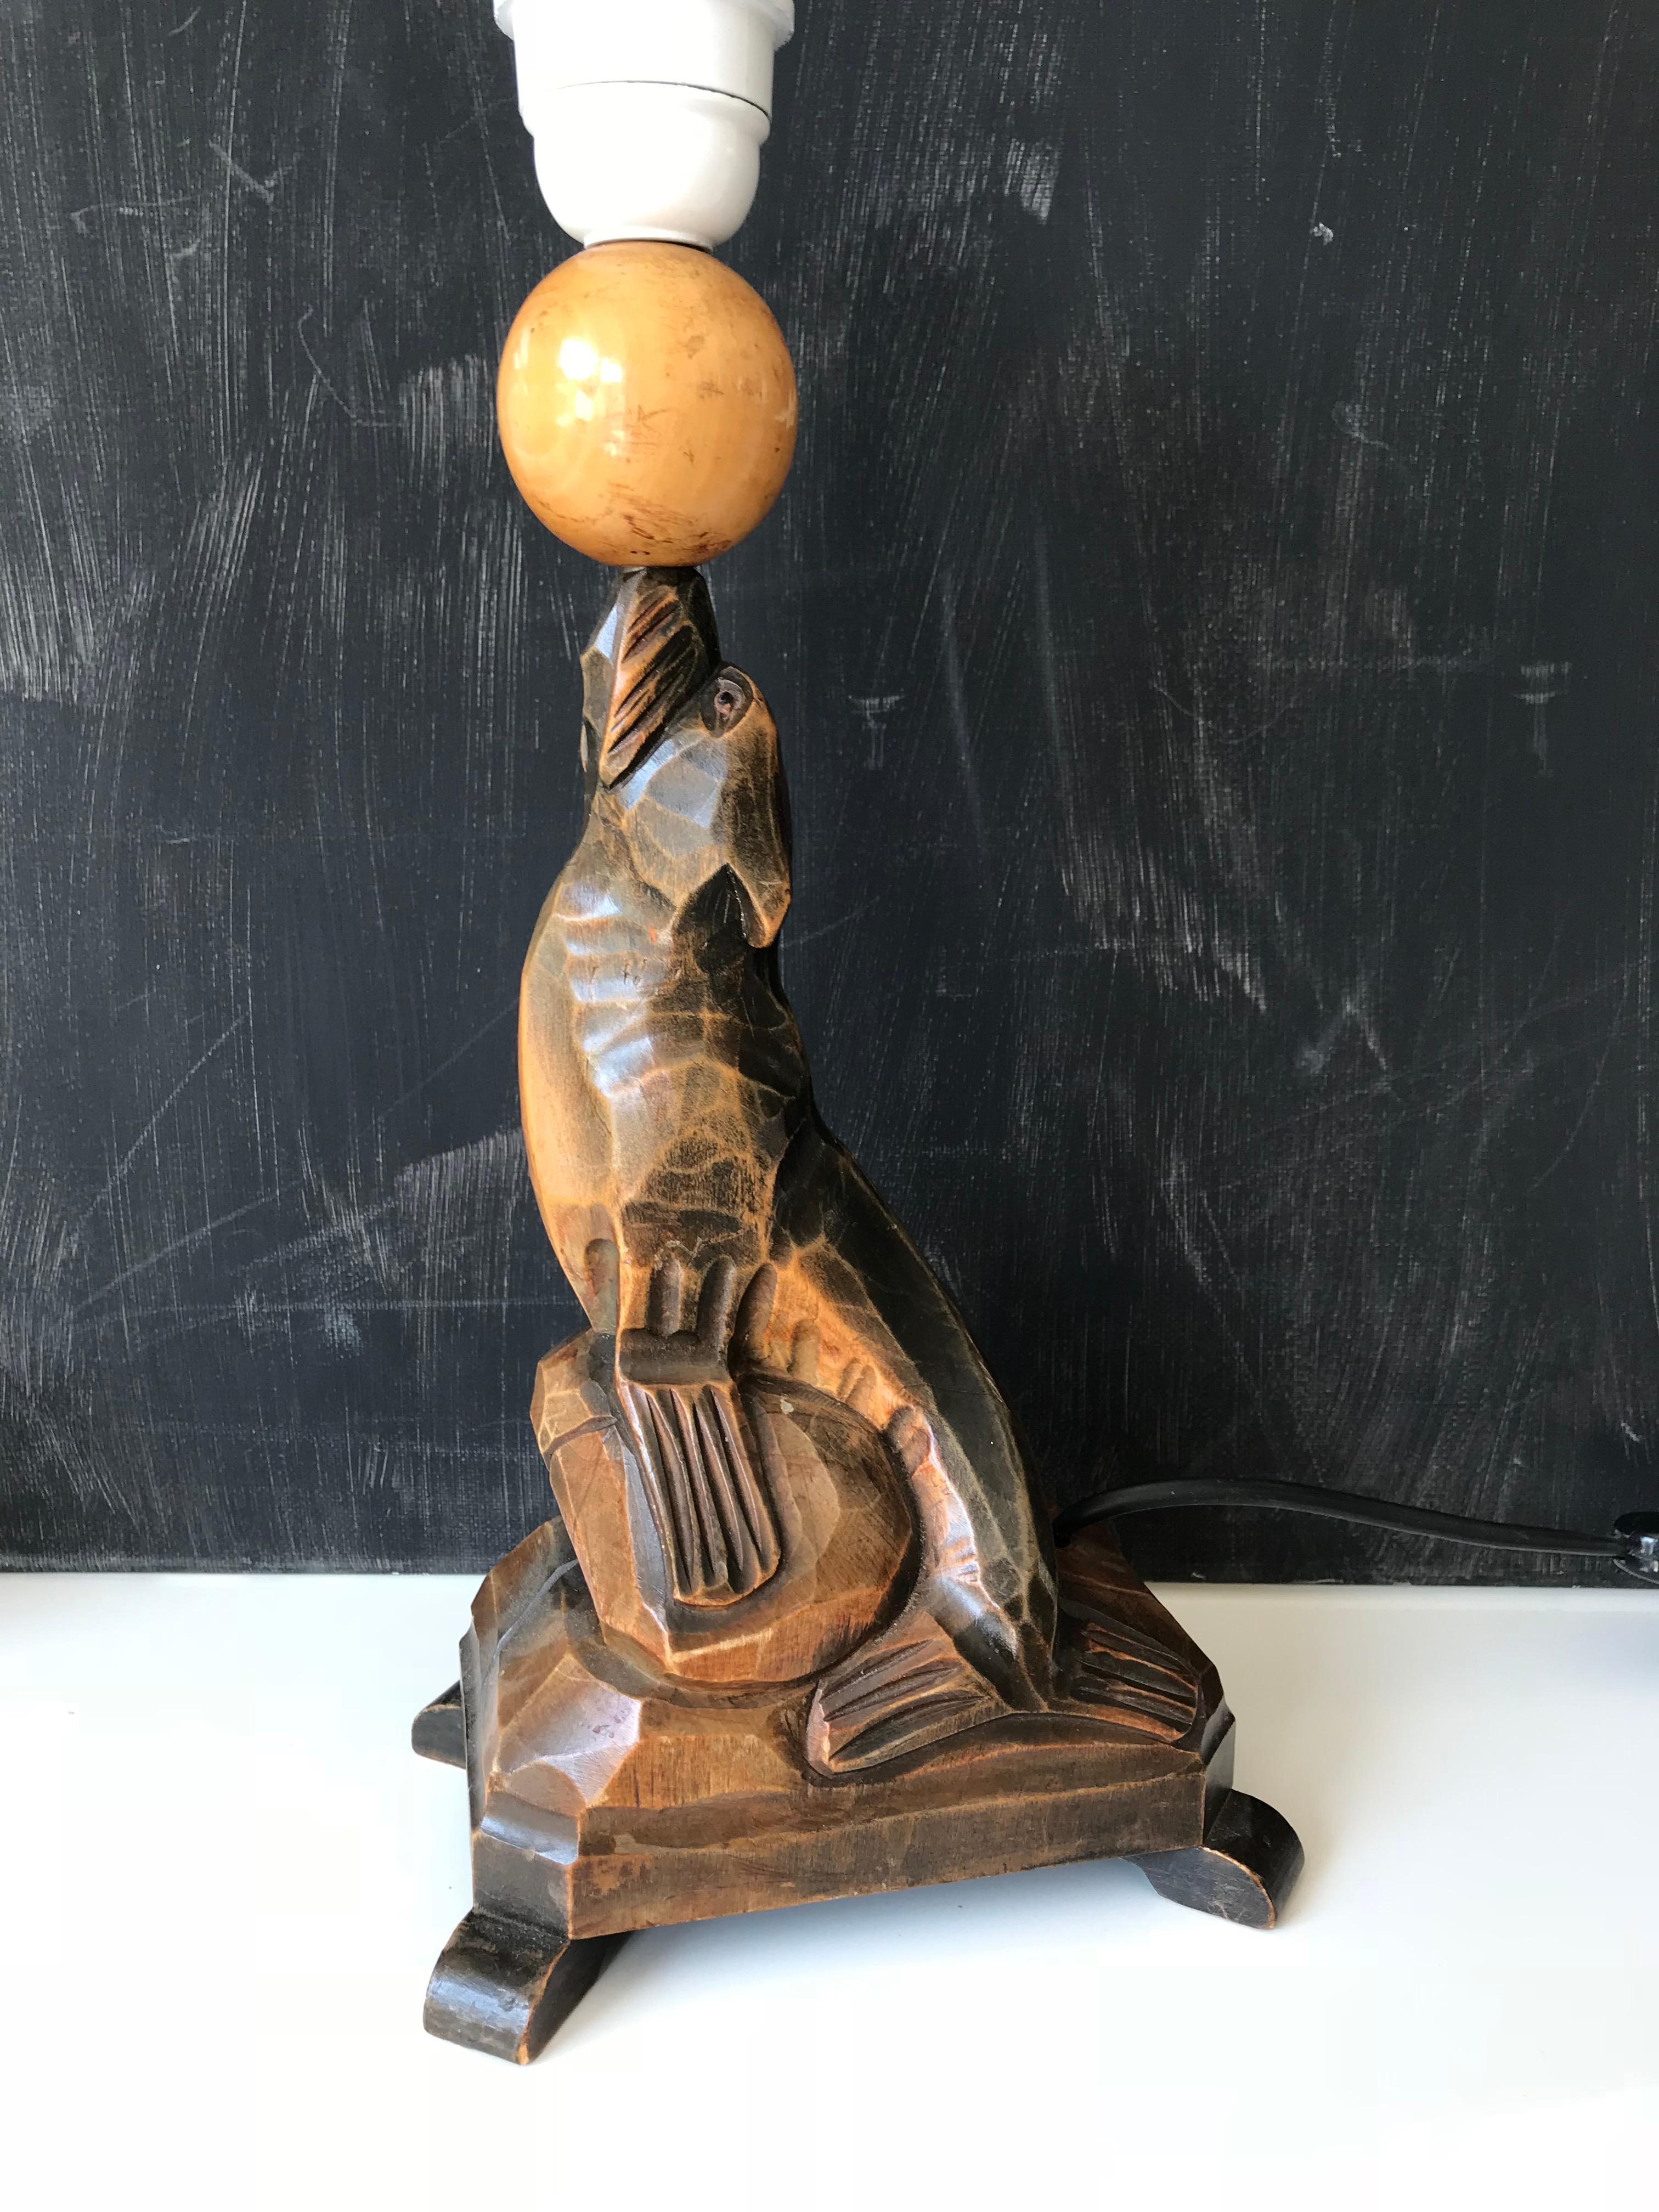 With the holiday season on our doorstep we are offering a number of season related items, but also many smaller and lower priced art and antiques that will make great gifts for yourself and for family & friends. This is one of such items. We will